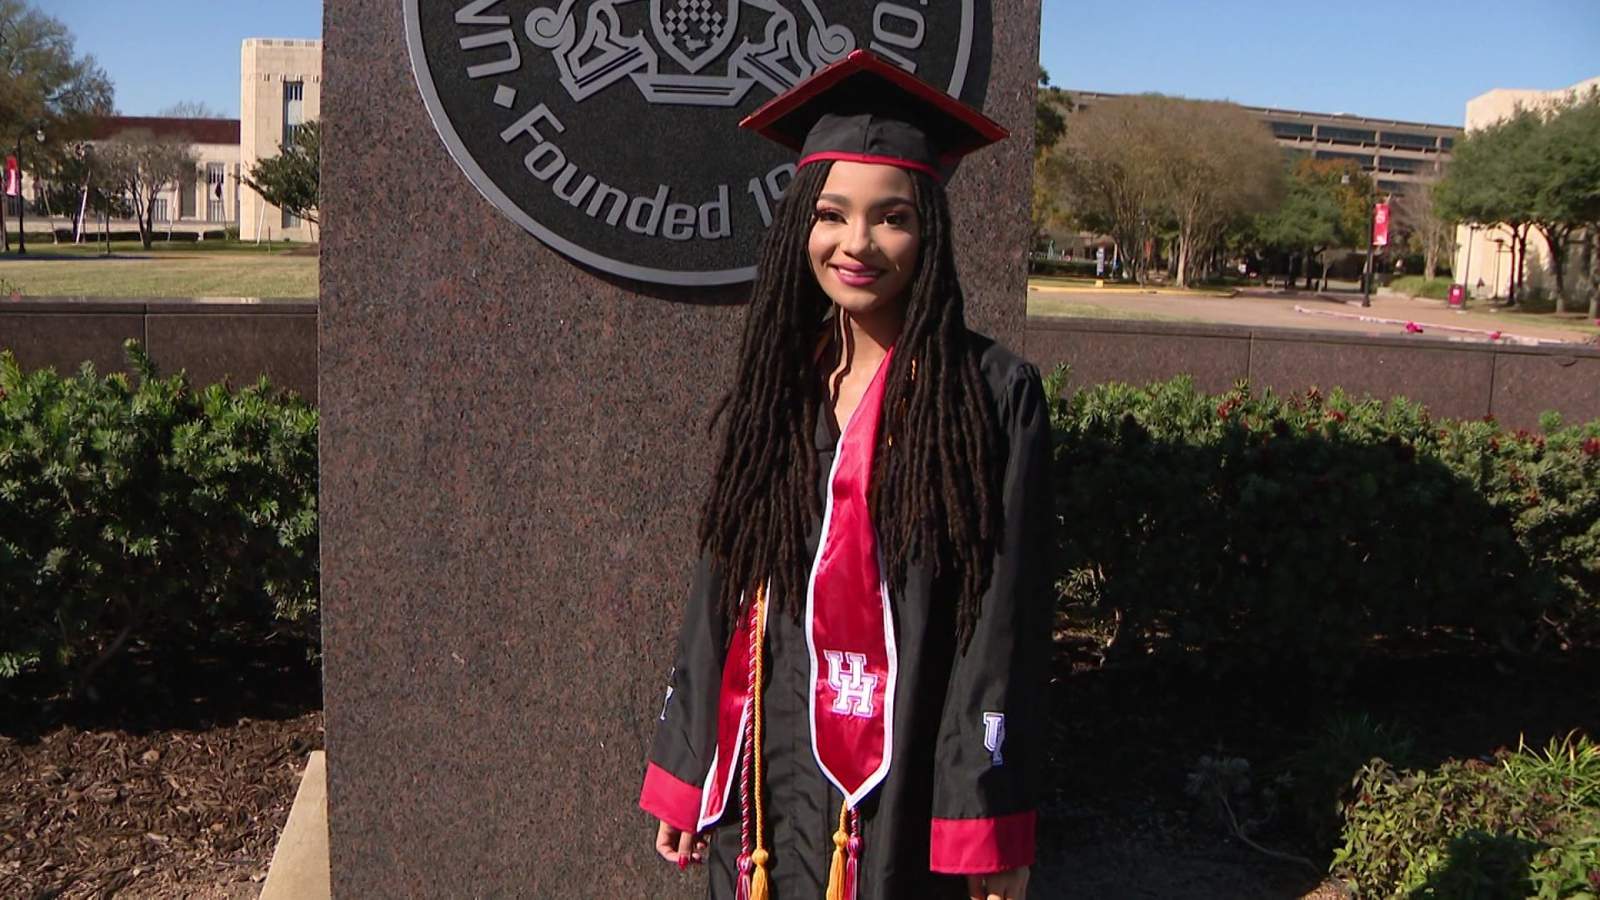 Meet the 17-year-old who is one of the youngest graduates from the University of Houston